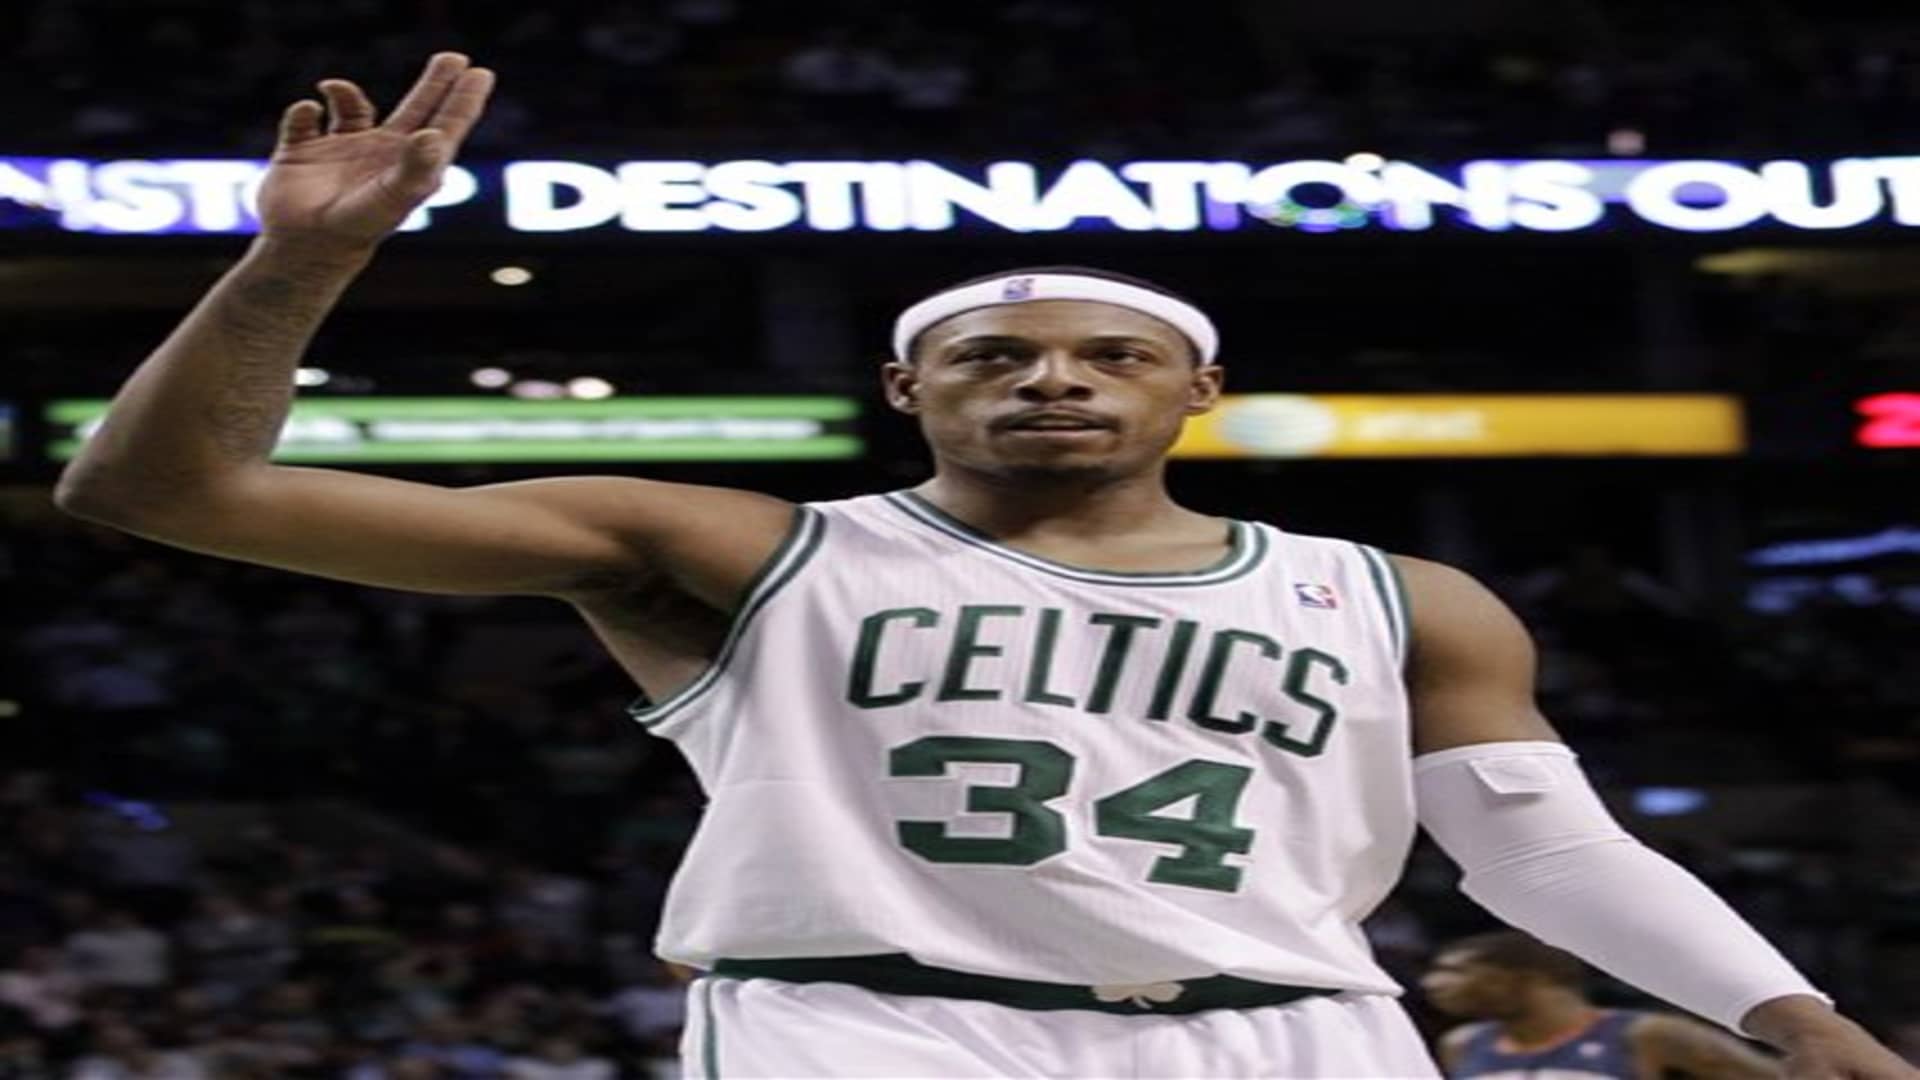 Boston Celtics forward Paul Pierce waves to the crowd after reaching No. 2 on the all-time Celtics scoring list, surpassing Larry Bird, during the second half of an NBA basketball game against the Charlotte Bobcats in Boston on Tuesday, Feb. 7, 2012. (AP Photo/Elise Amendola)